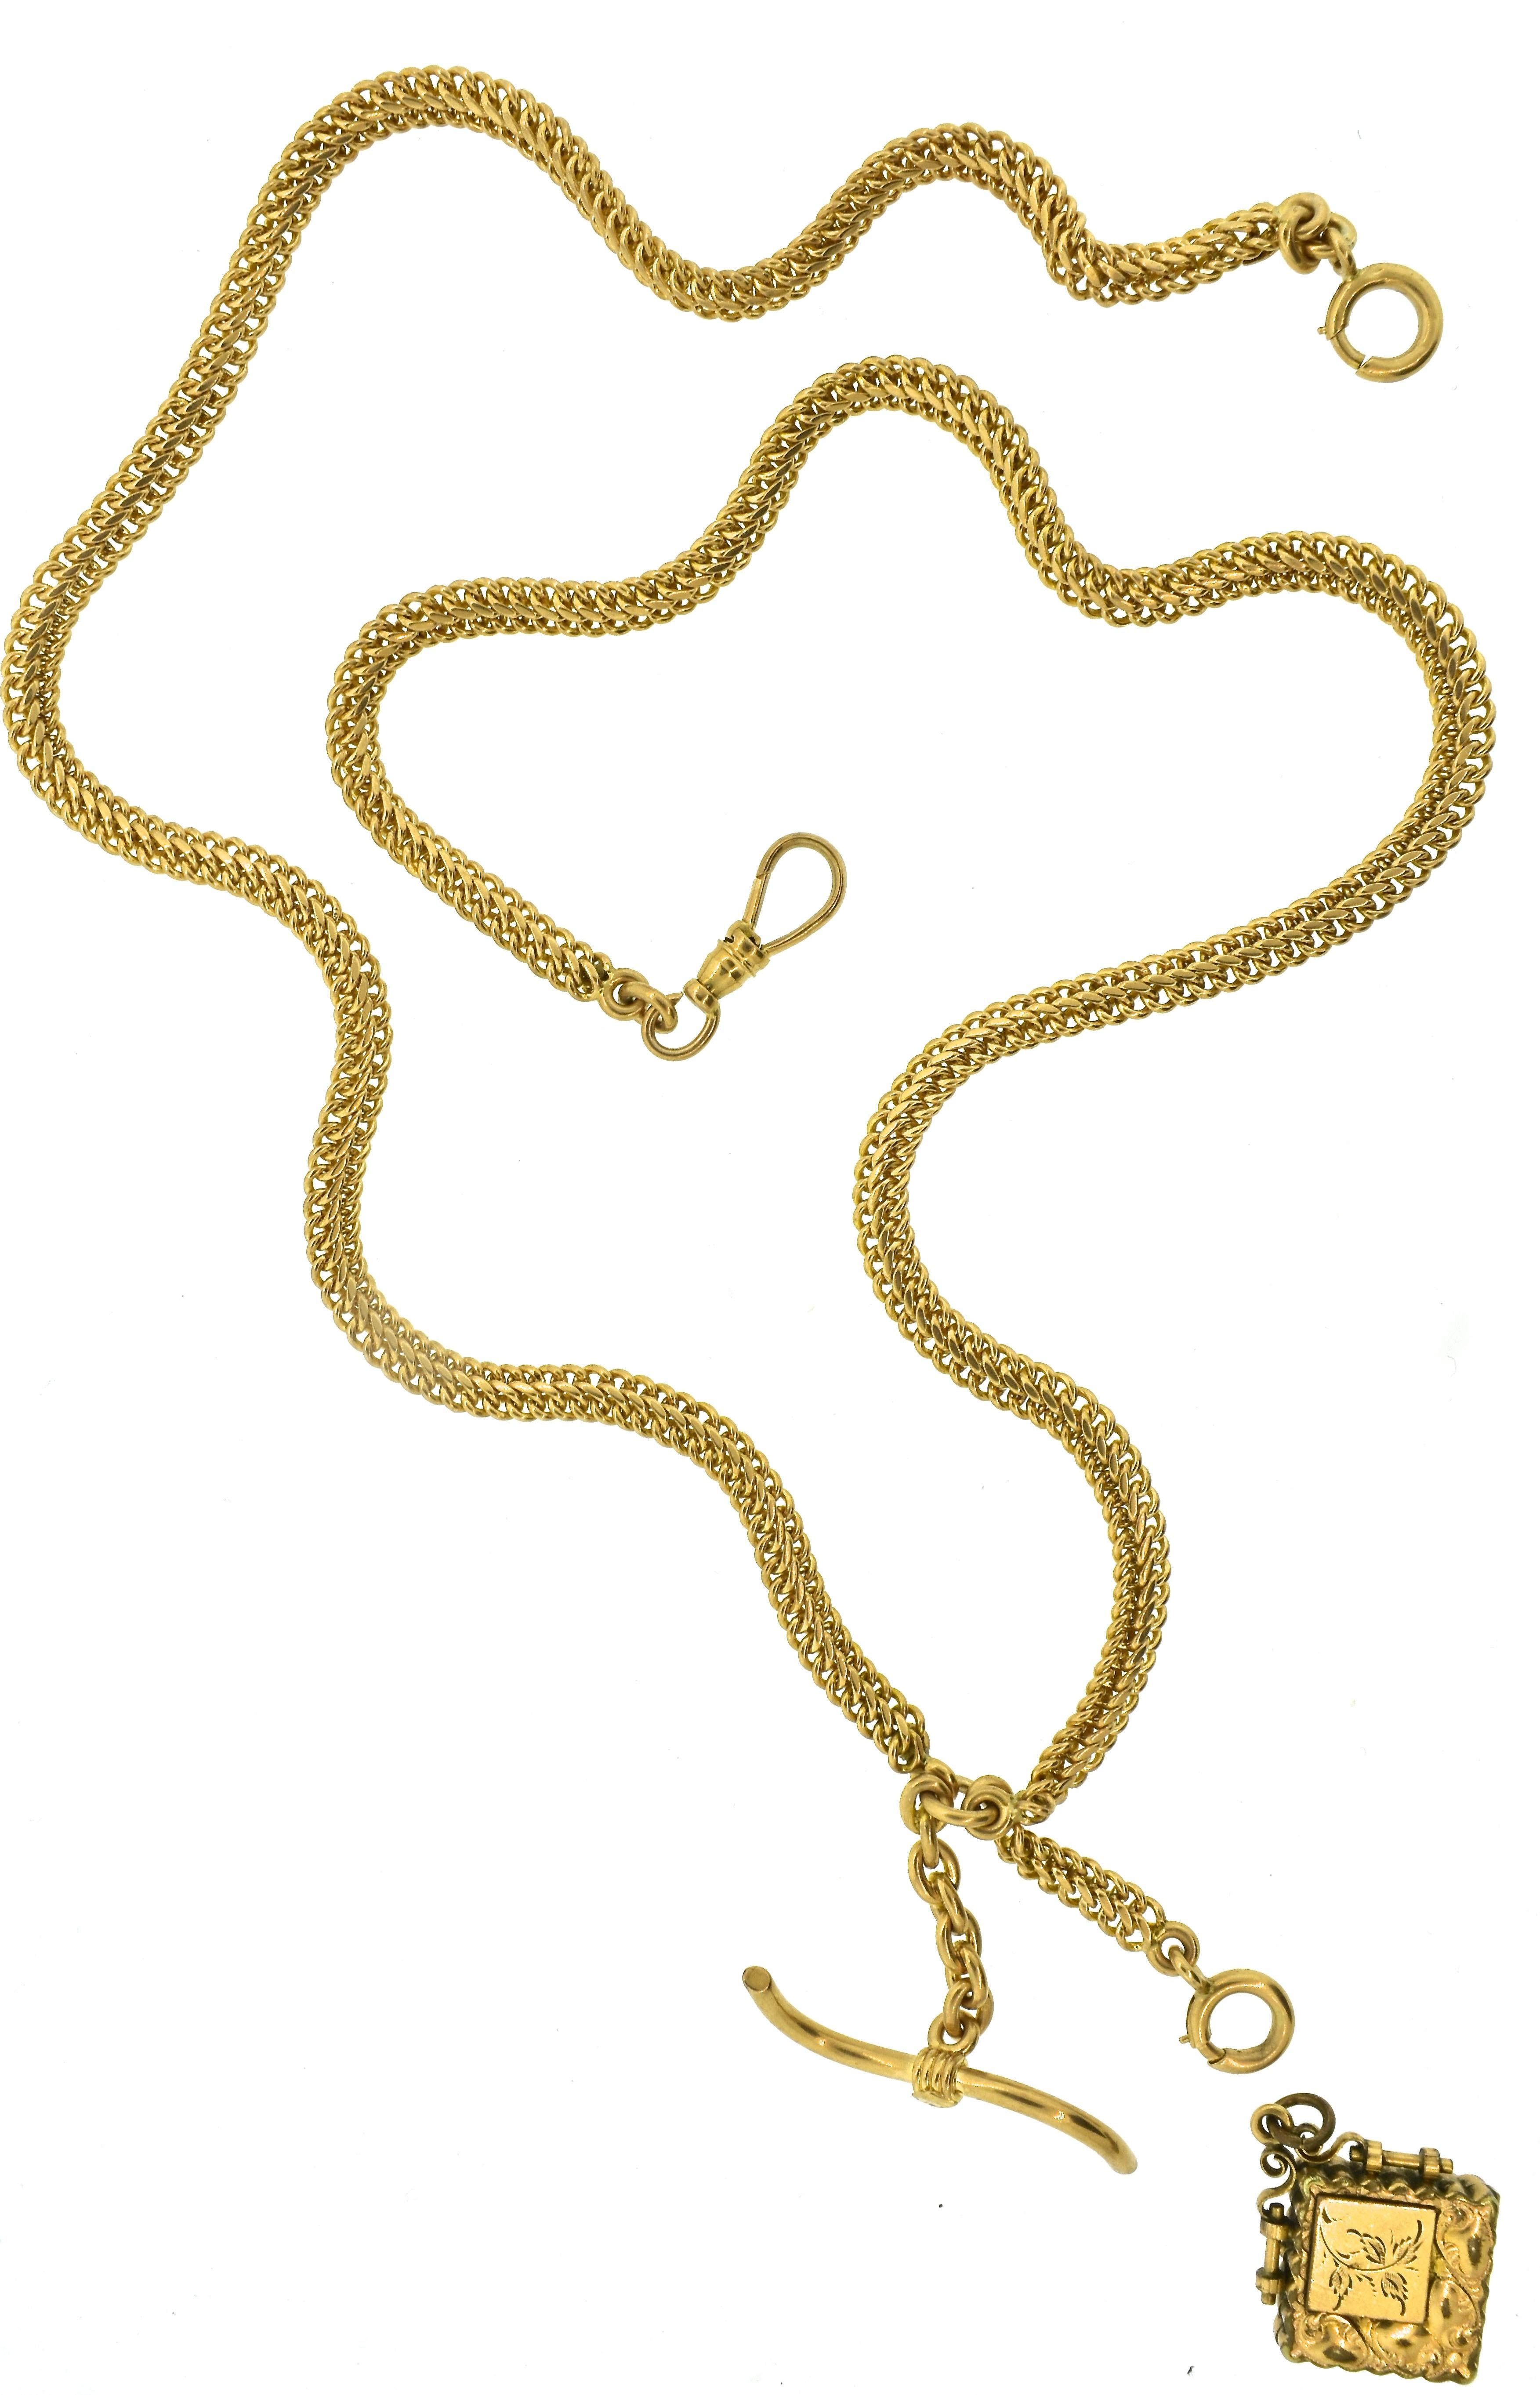 Victorian chain originally for a pocket watch, but now these chains are popular as neck chains.  One can add different pendants.  This chain weighs 59.27 grams and is 14k gold.  It does come with a small locket which dates to the same time period -